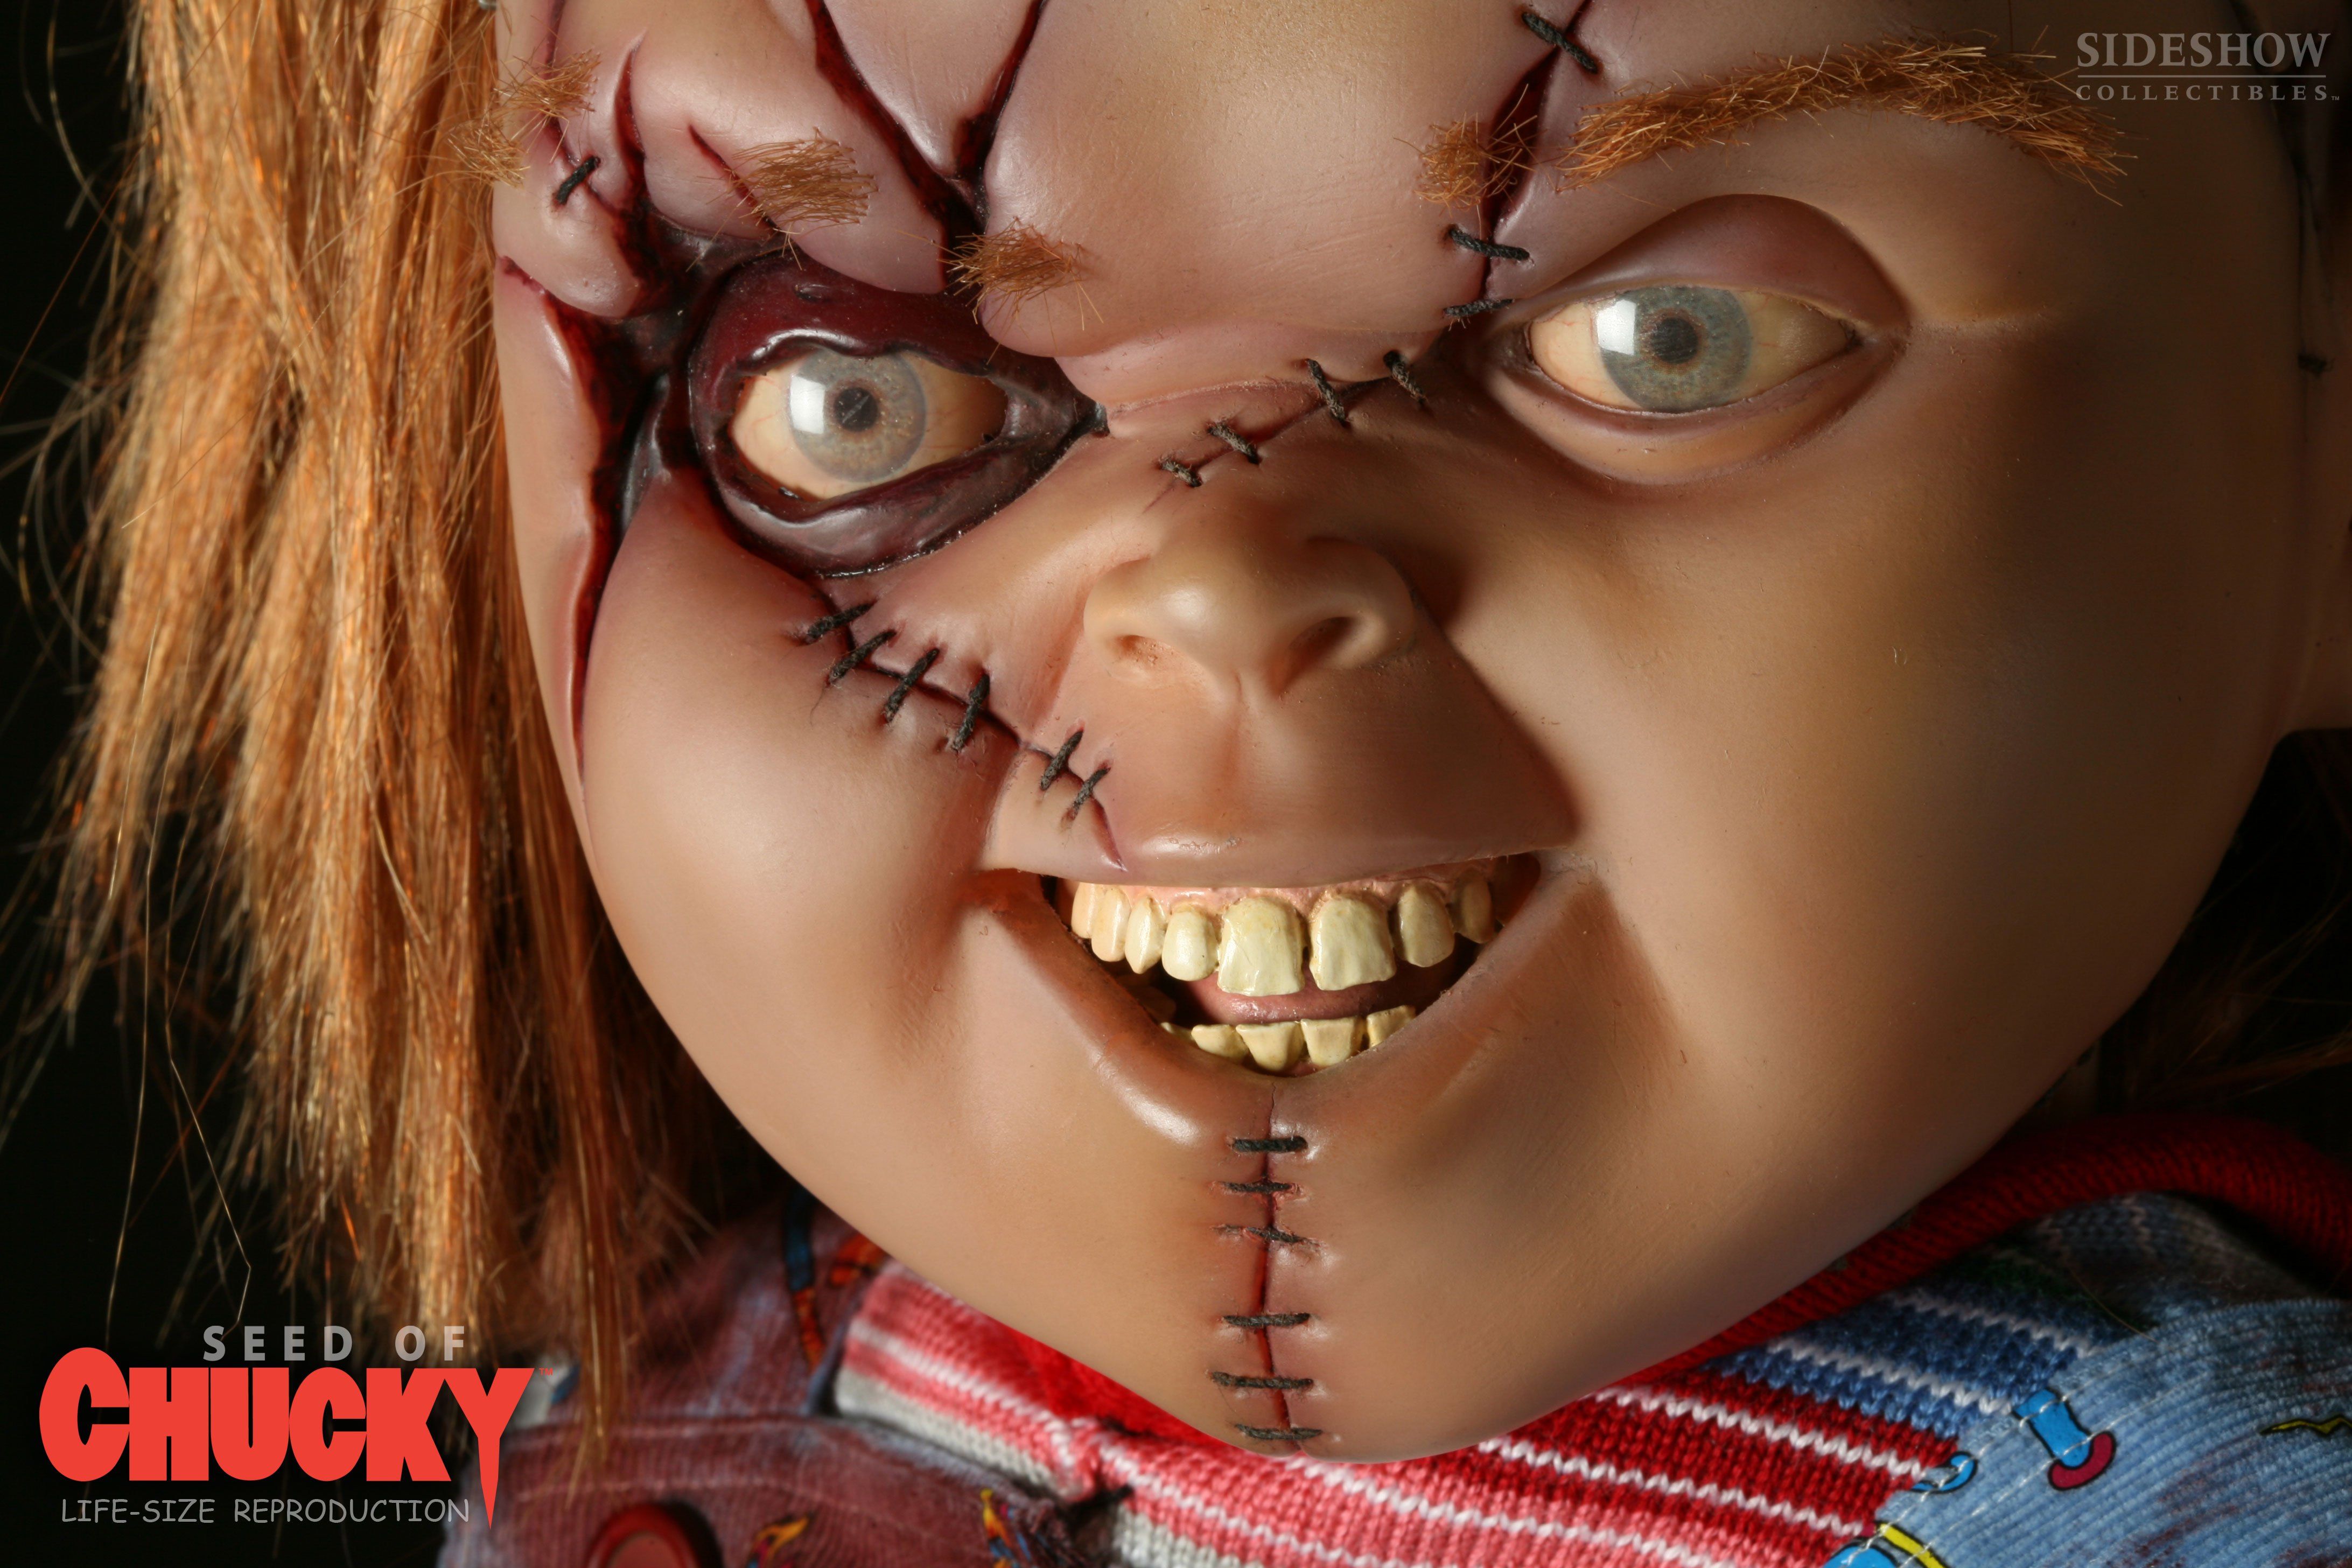 Scary Image Of Chucky